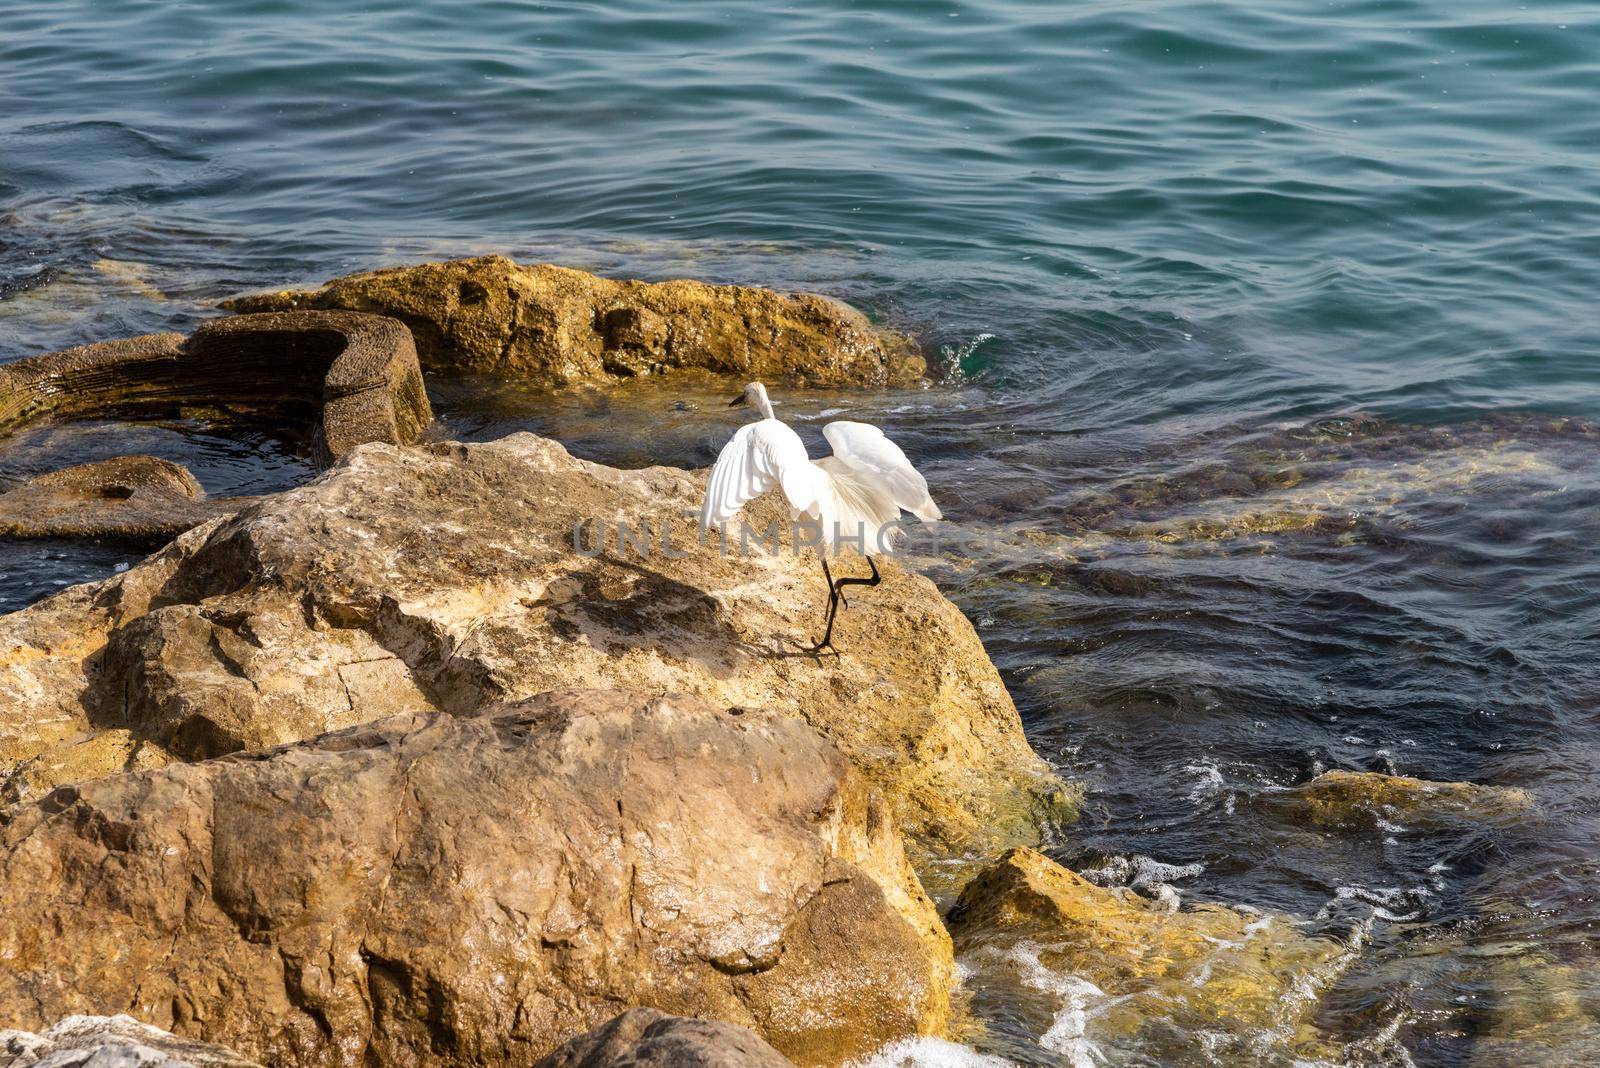 White Heron is Fishing, Heron Looking For Fish, Heron Walking On Water. Heron on a rock at the moment of the blue waters of the Mediterranean Sea by avirozen